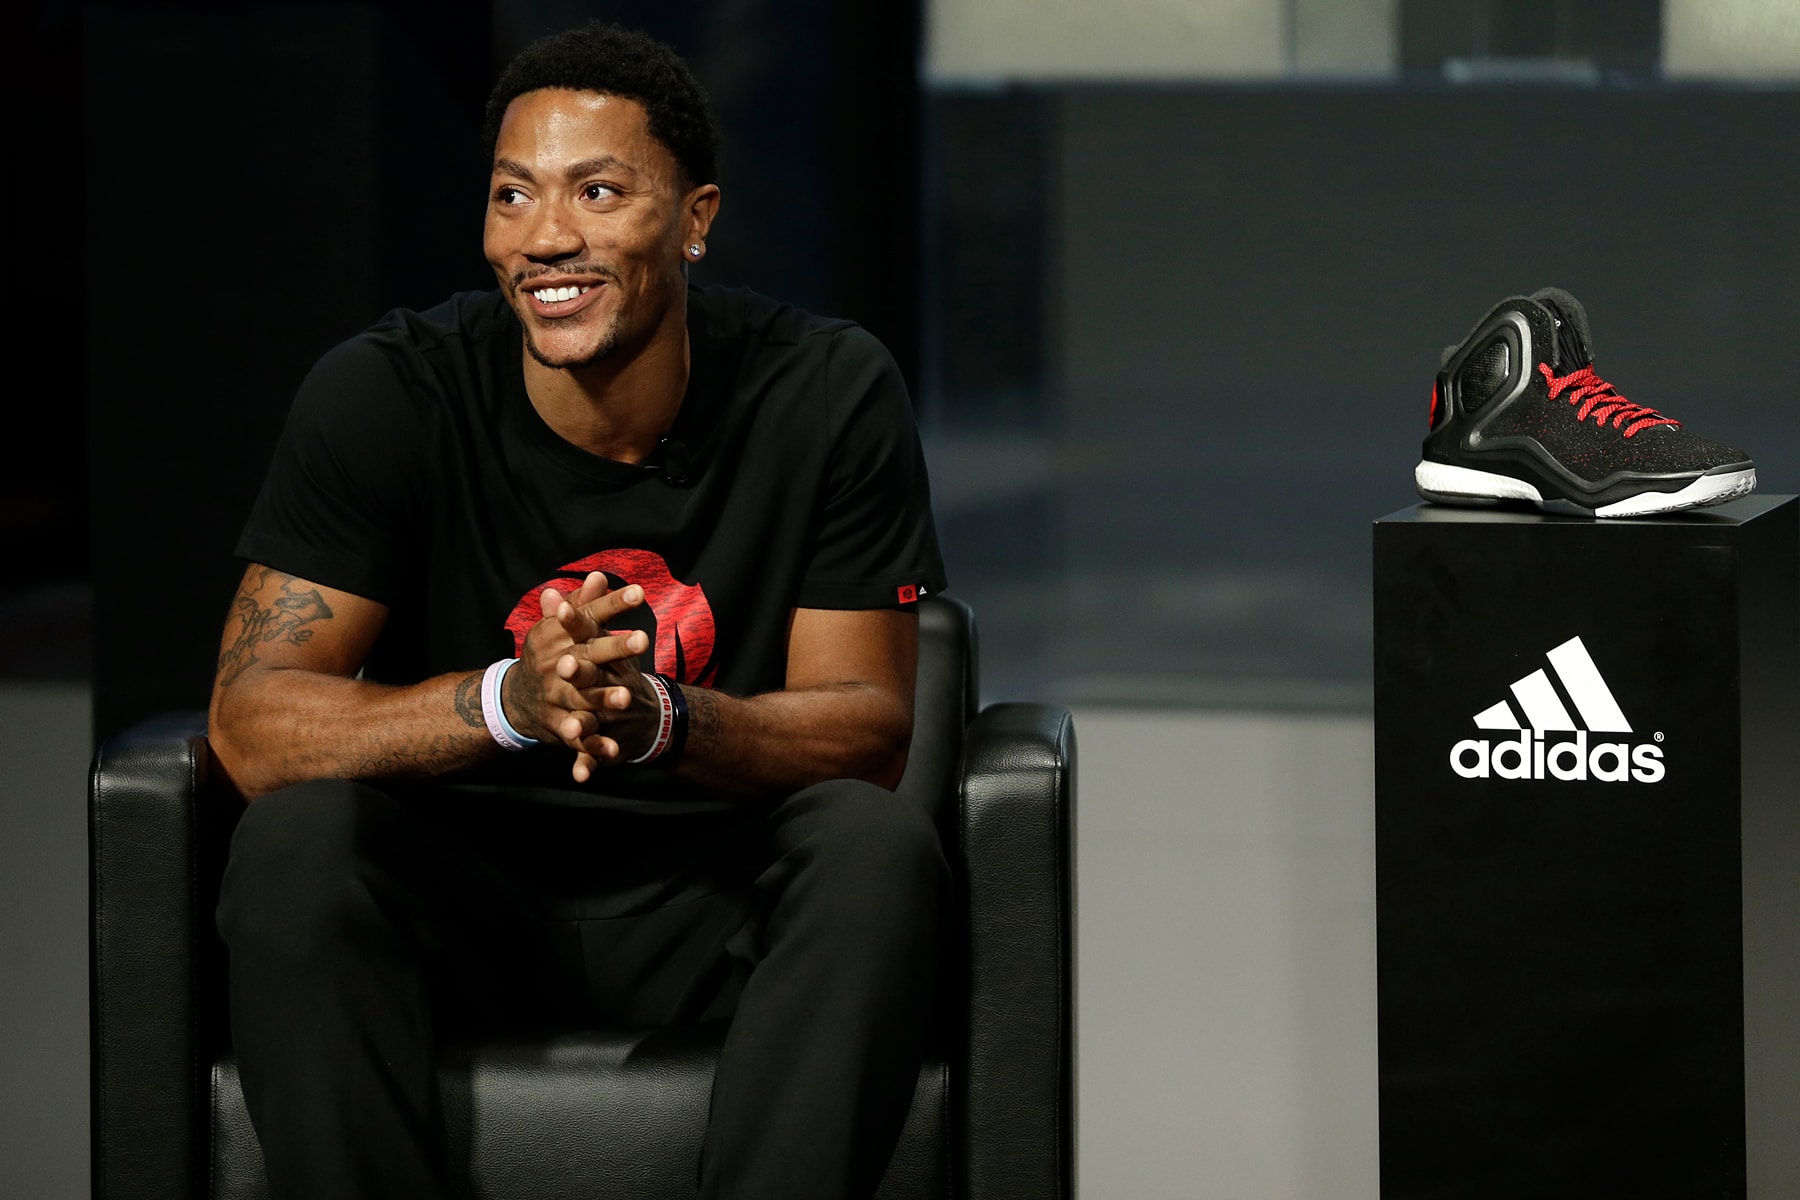 derrick rose adidas hoops basketball sneaker signature d contract agreement salary earnings money brother friend